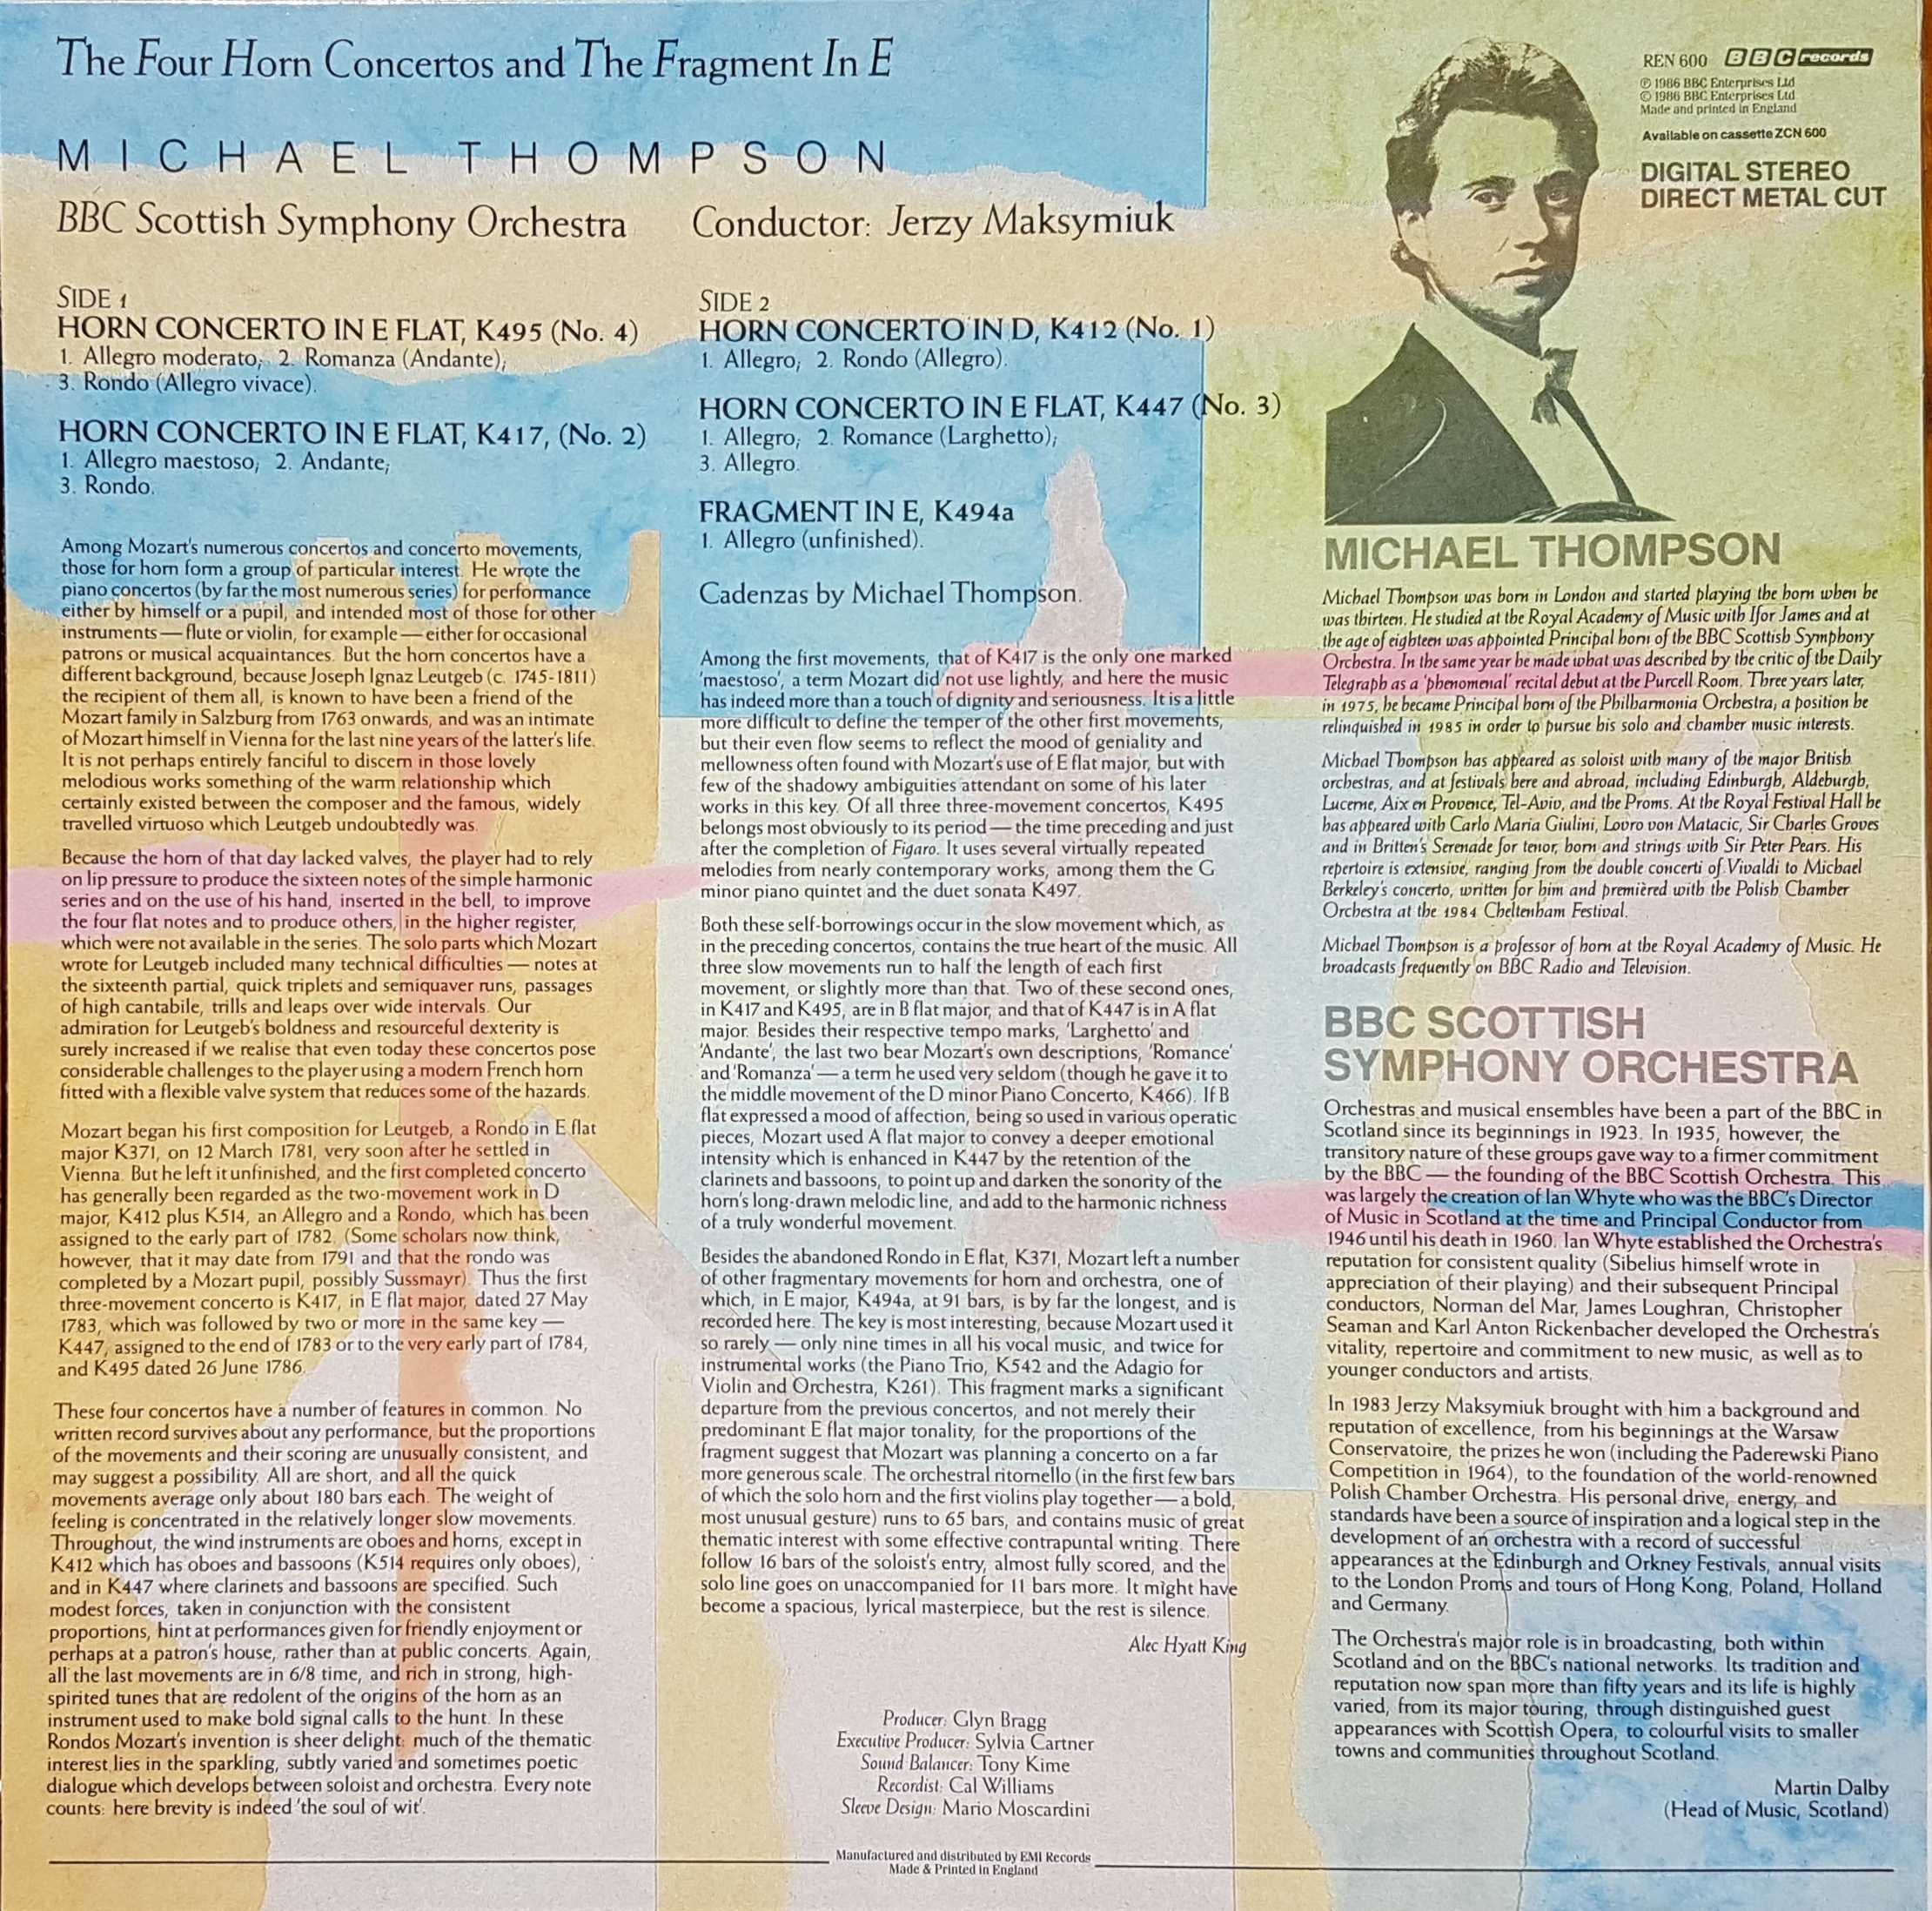 Picture of REN 600 Mozart - Four horn concertos and the fragment in E by artist Mozart from the BBC records and Tapes library